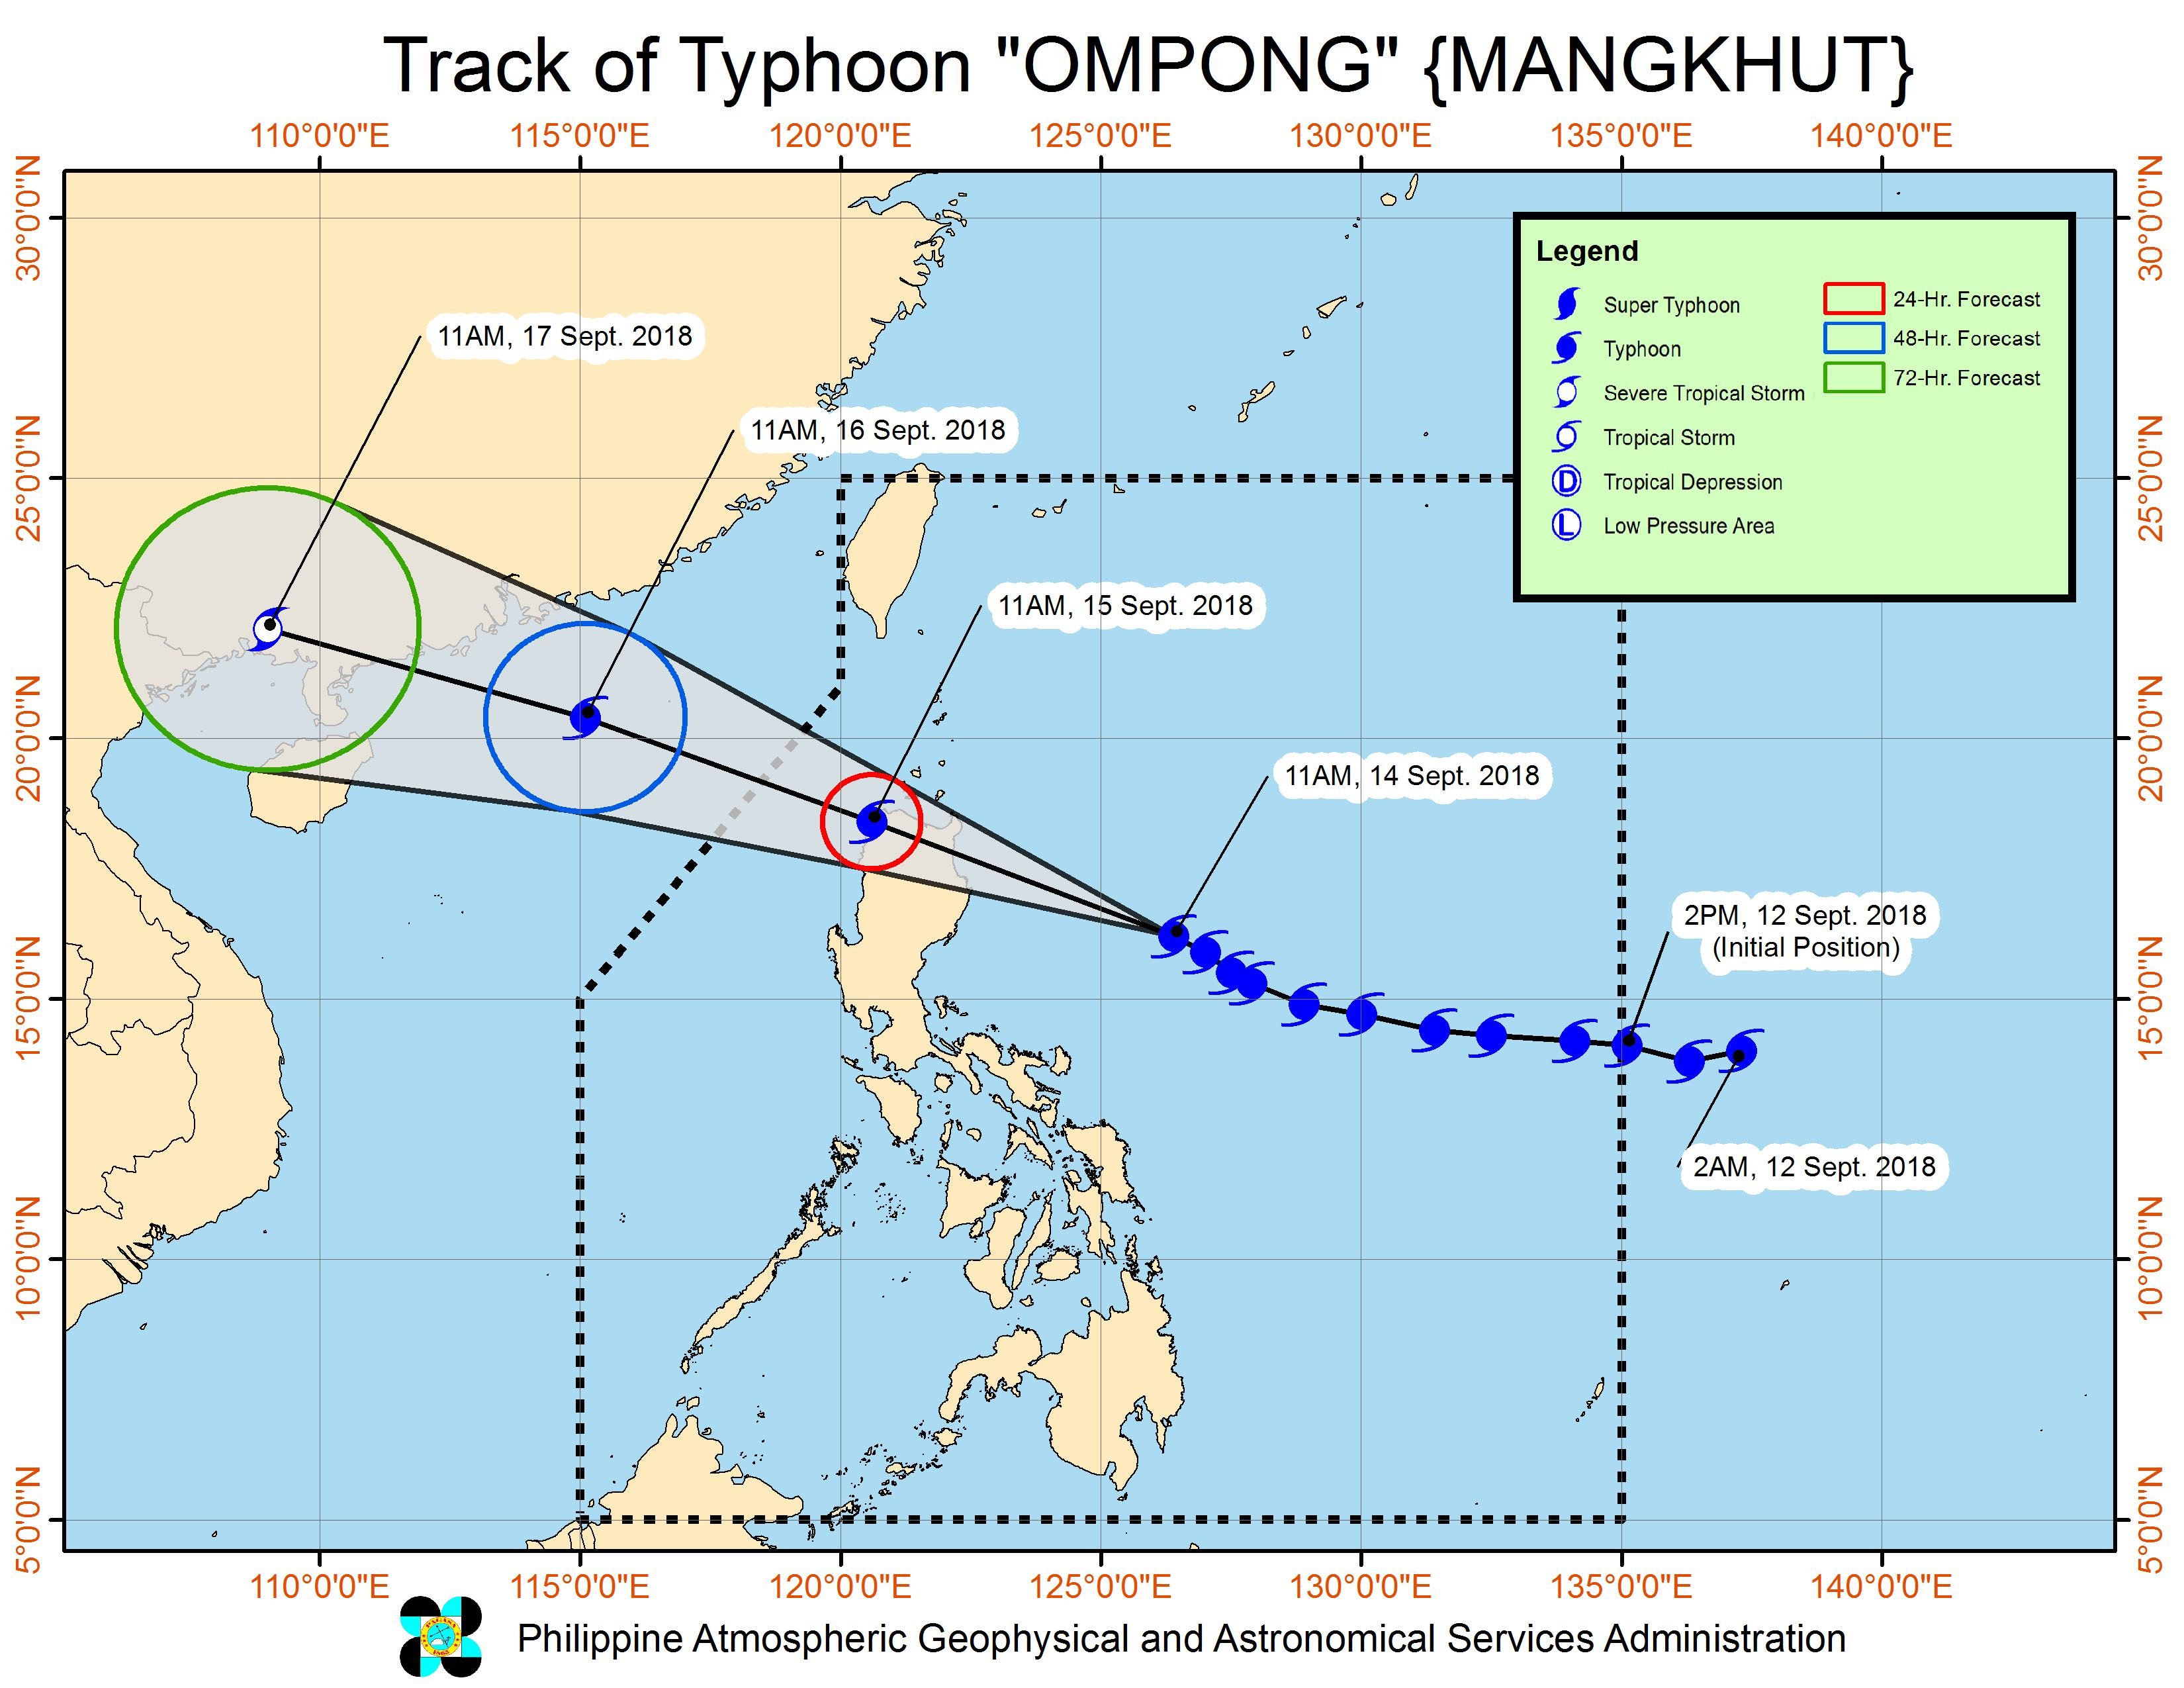 Forecast track of Typhoon Ompong (Mangkhut) as of September 14, 2018, 2 pm. Image from PAGASA 